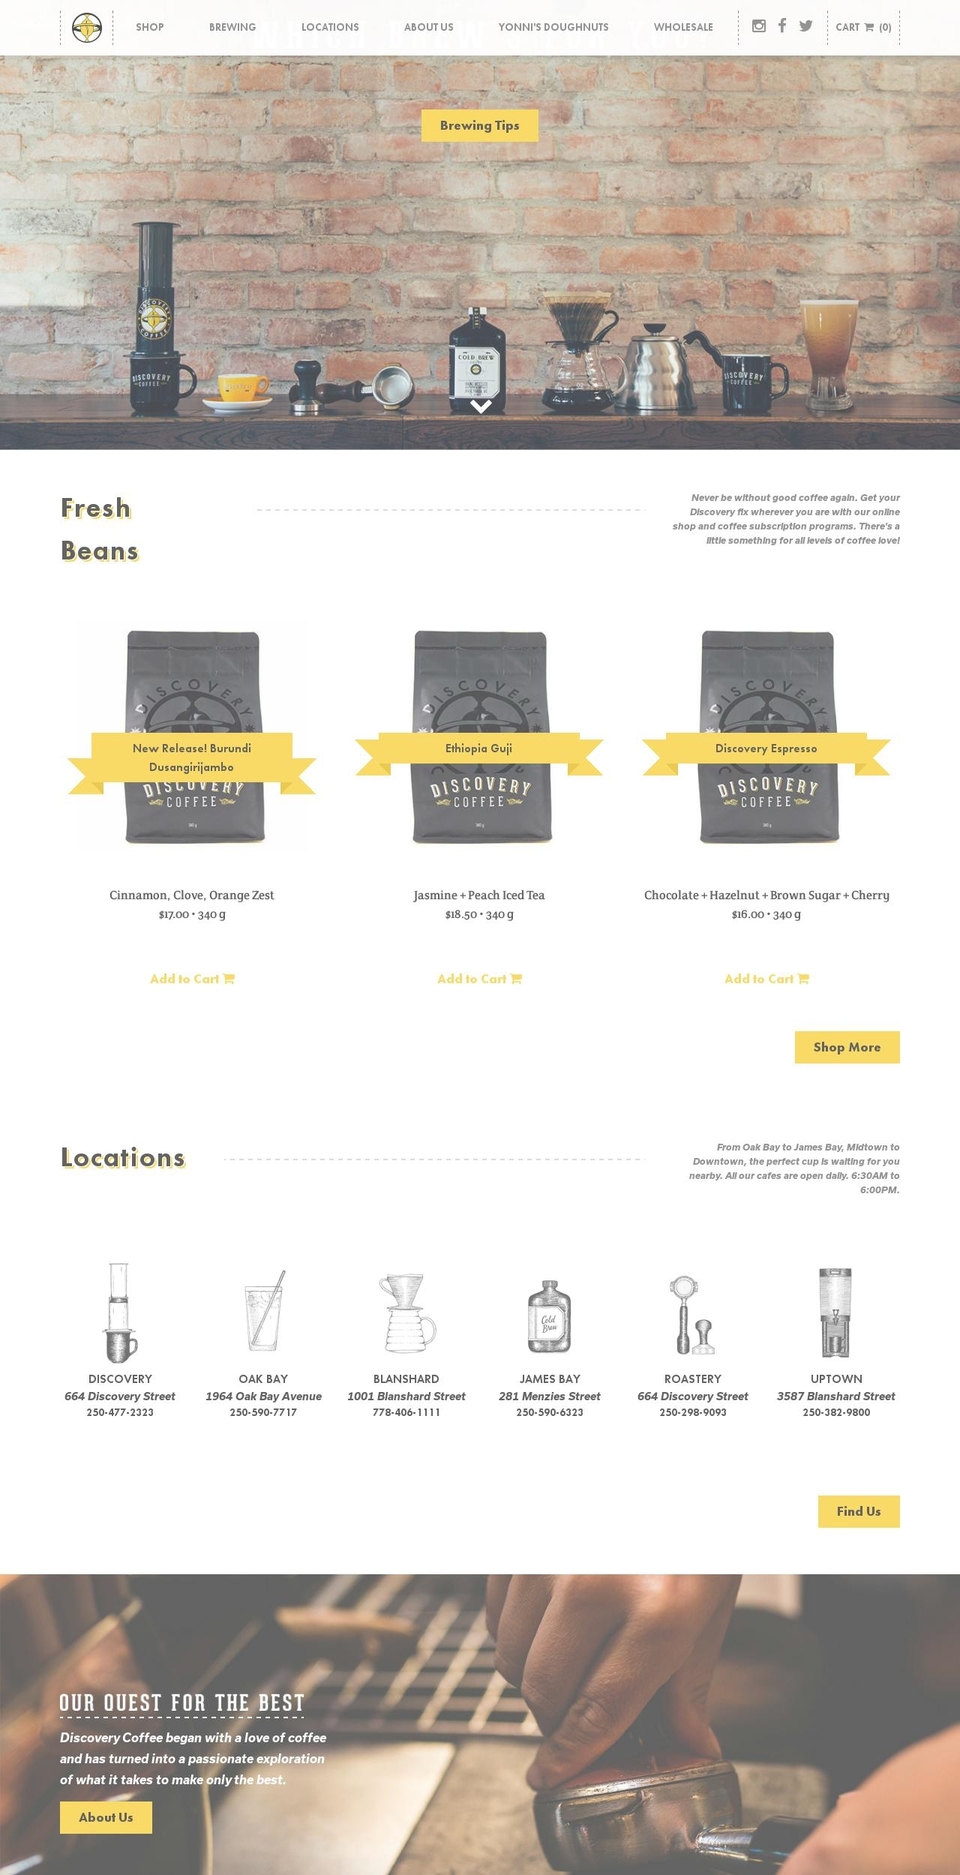 Fresh Shopify theme site example discoverycoffee.com